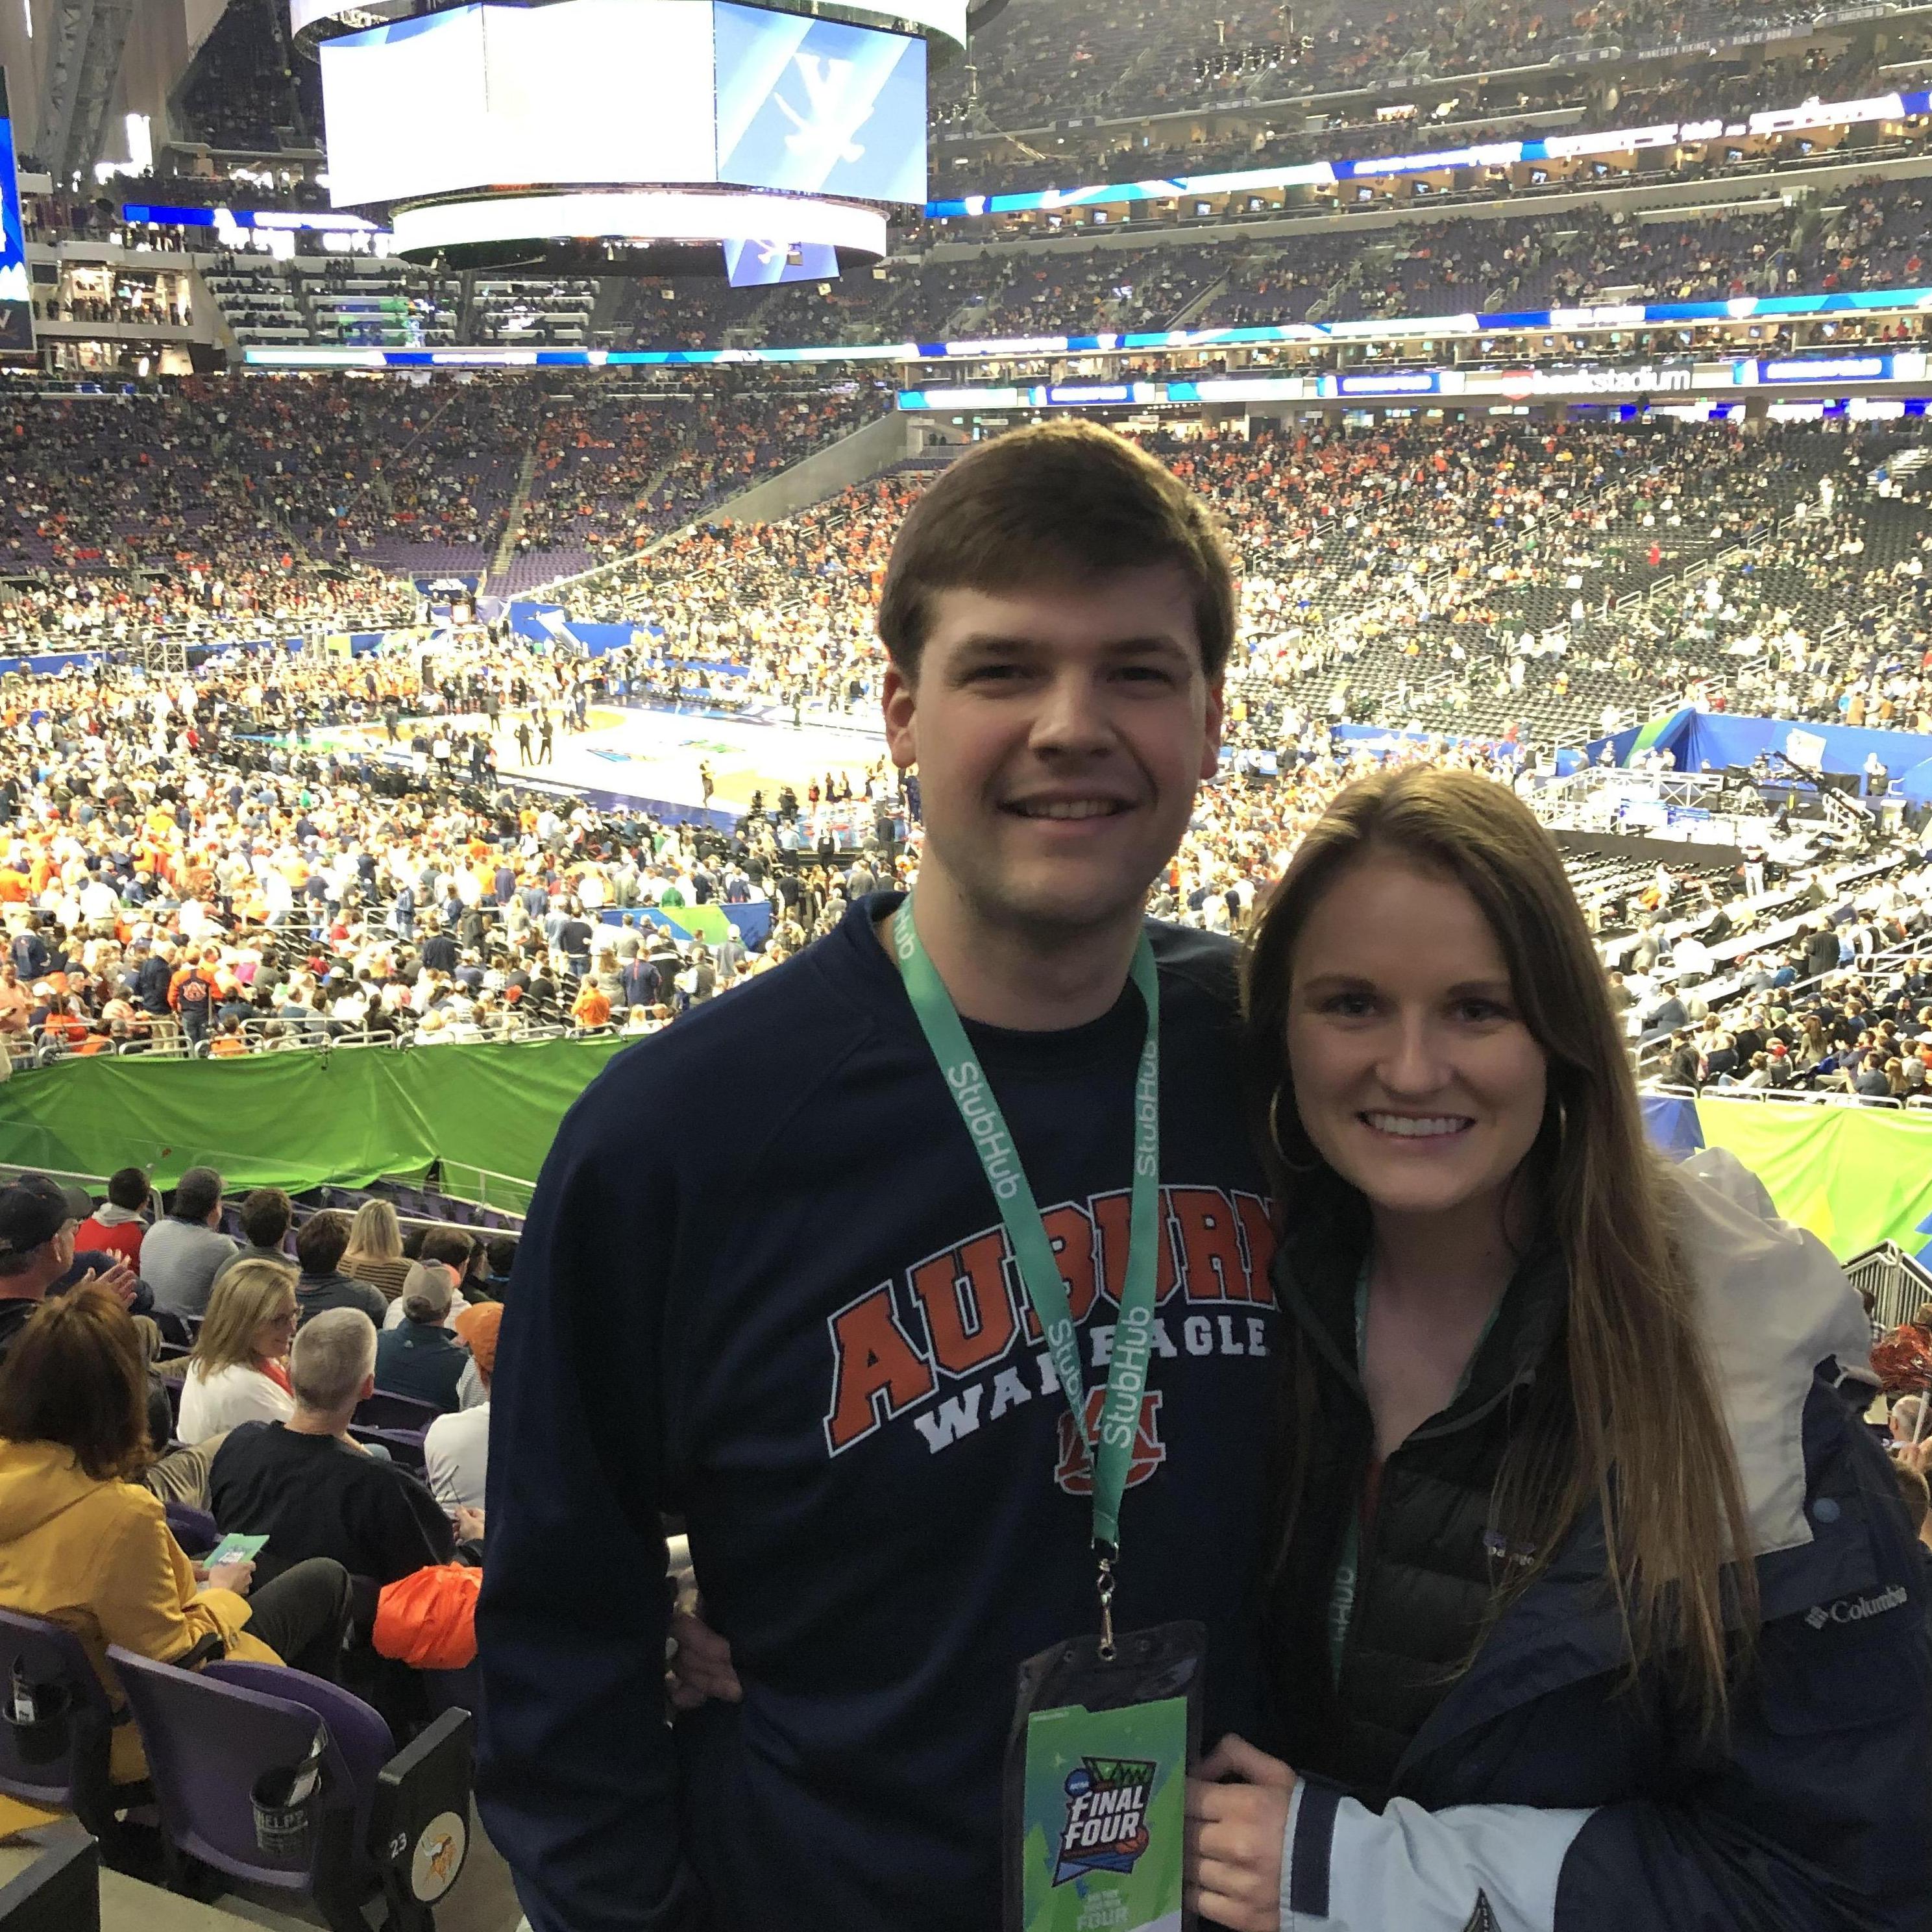 At the Final Four in 2019 cheering on the Auburn Tigers in Minneapolis, MN